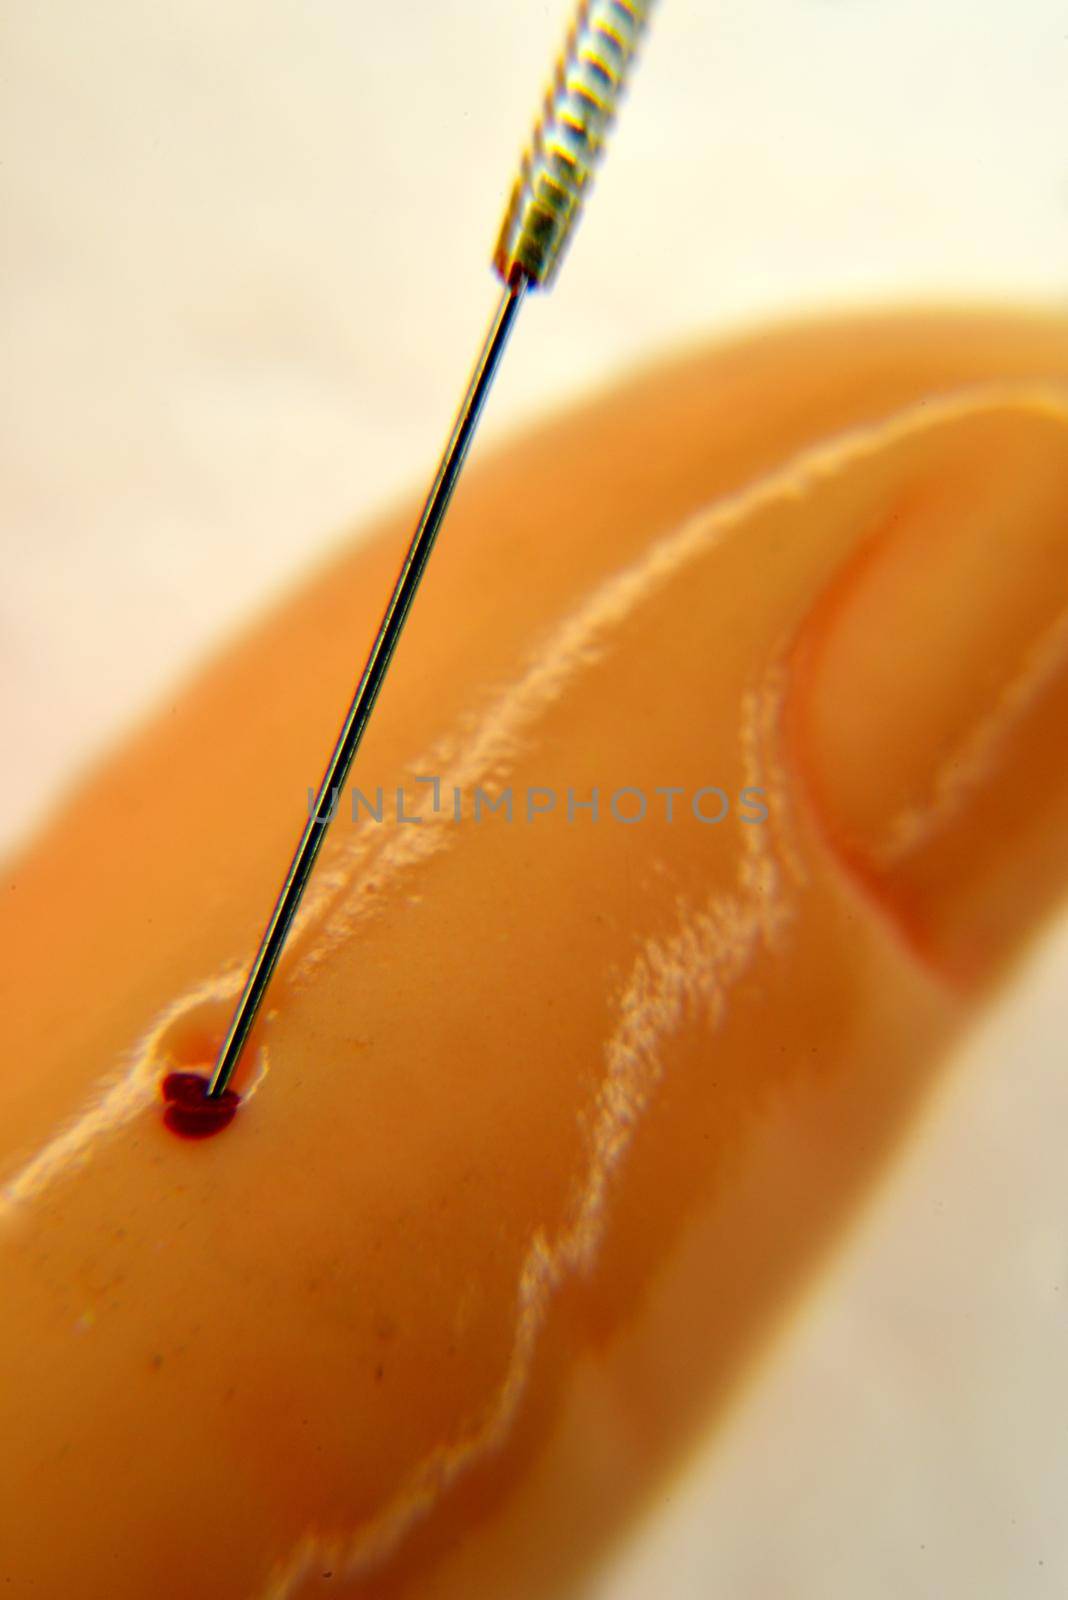 acupuncture demonstration on hand model